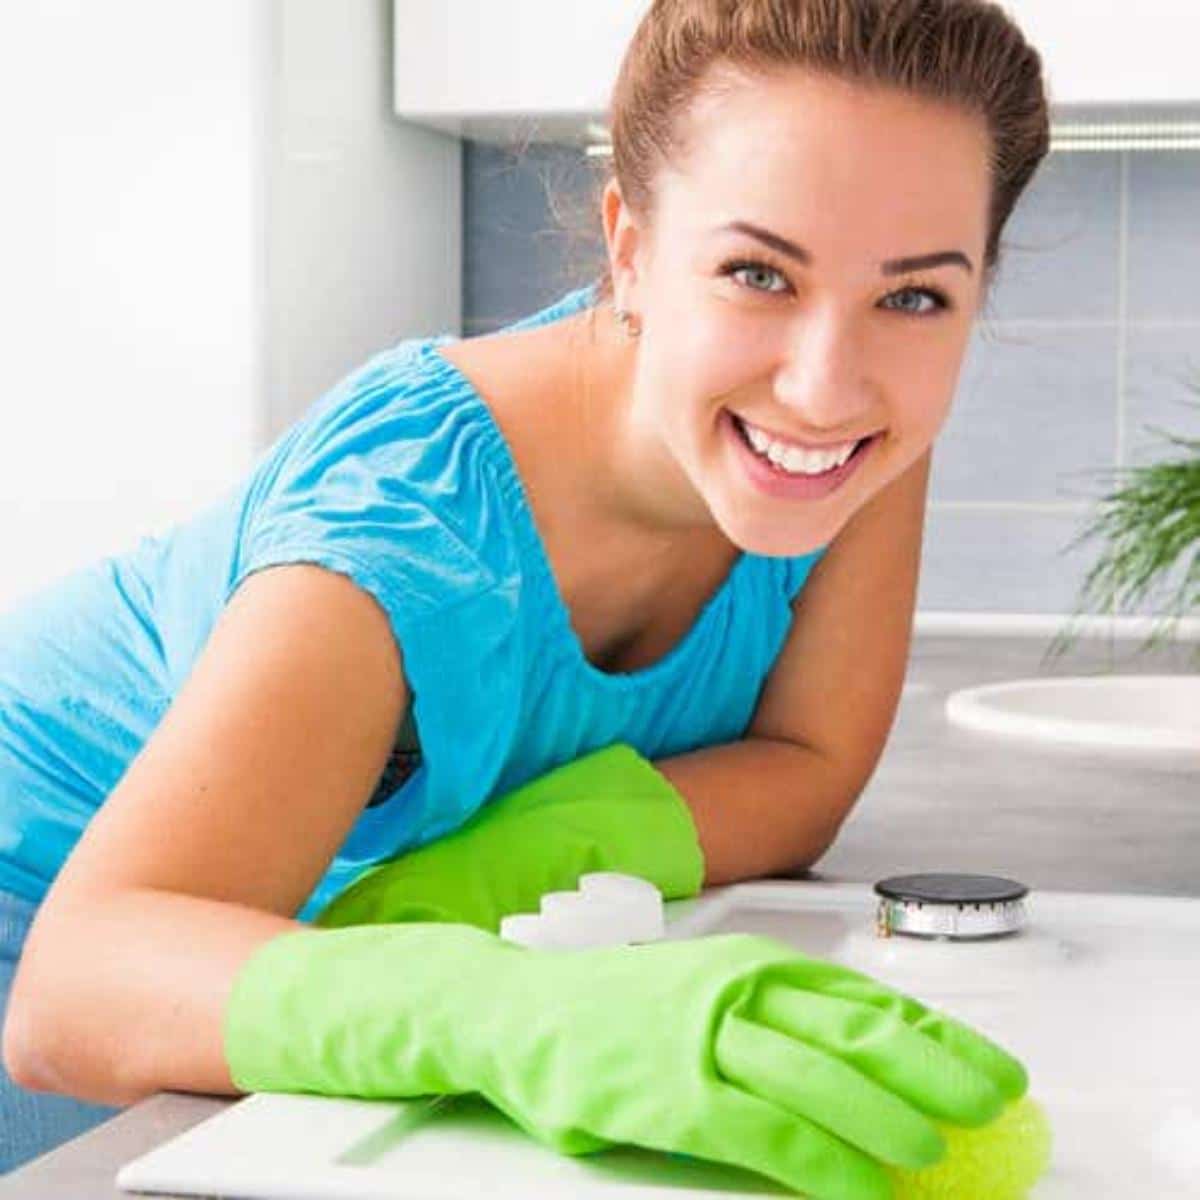 A smiling woman cleaning a desk.